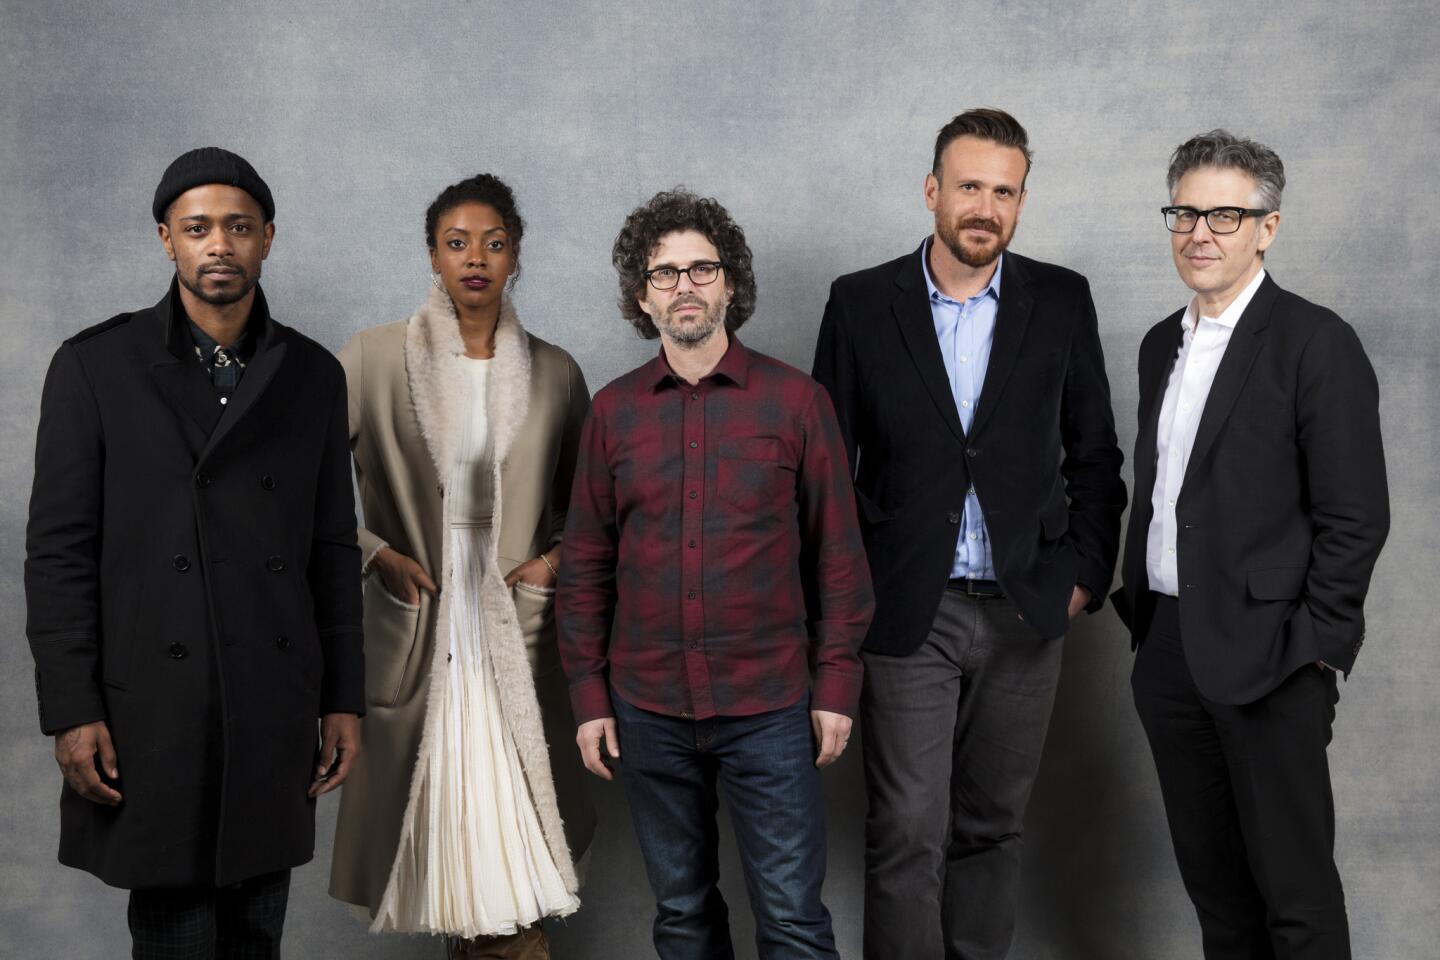 Actor Lakeith Stanfield, actress Condola Rashad, director Joshua Marston, actor Jason Segal and producer Ira Glass, from the film "Come Sunday."